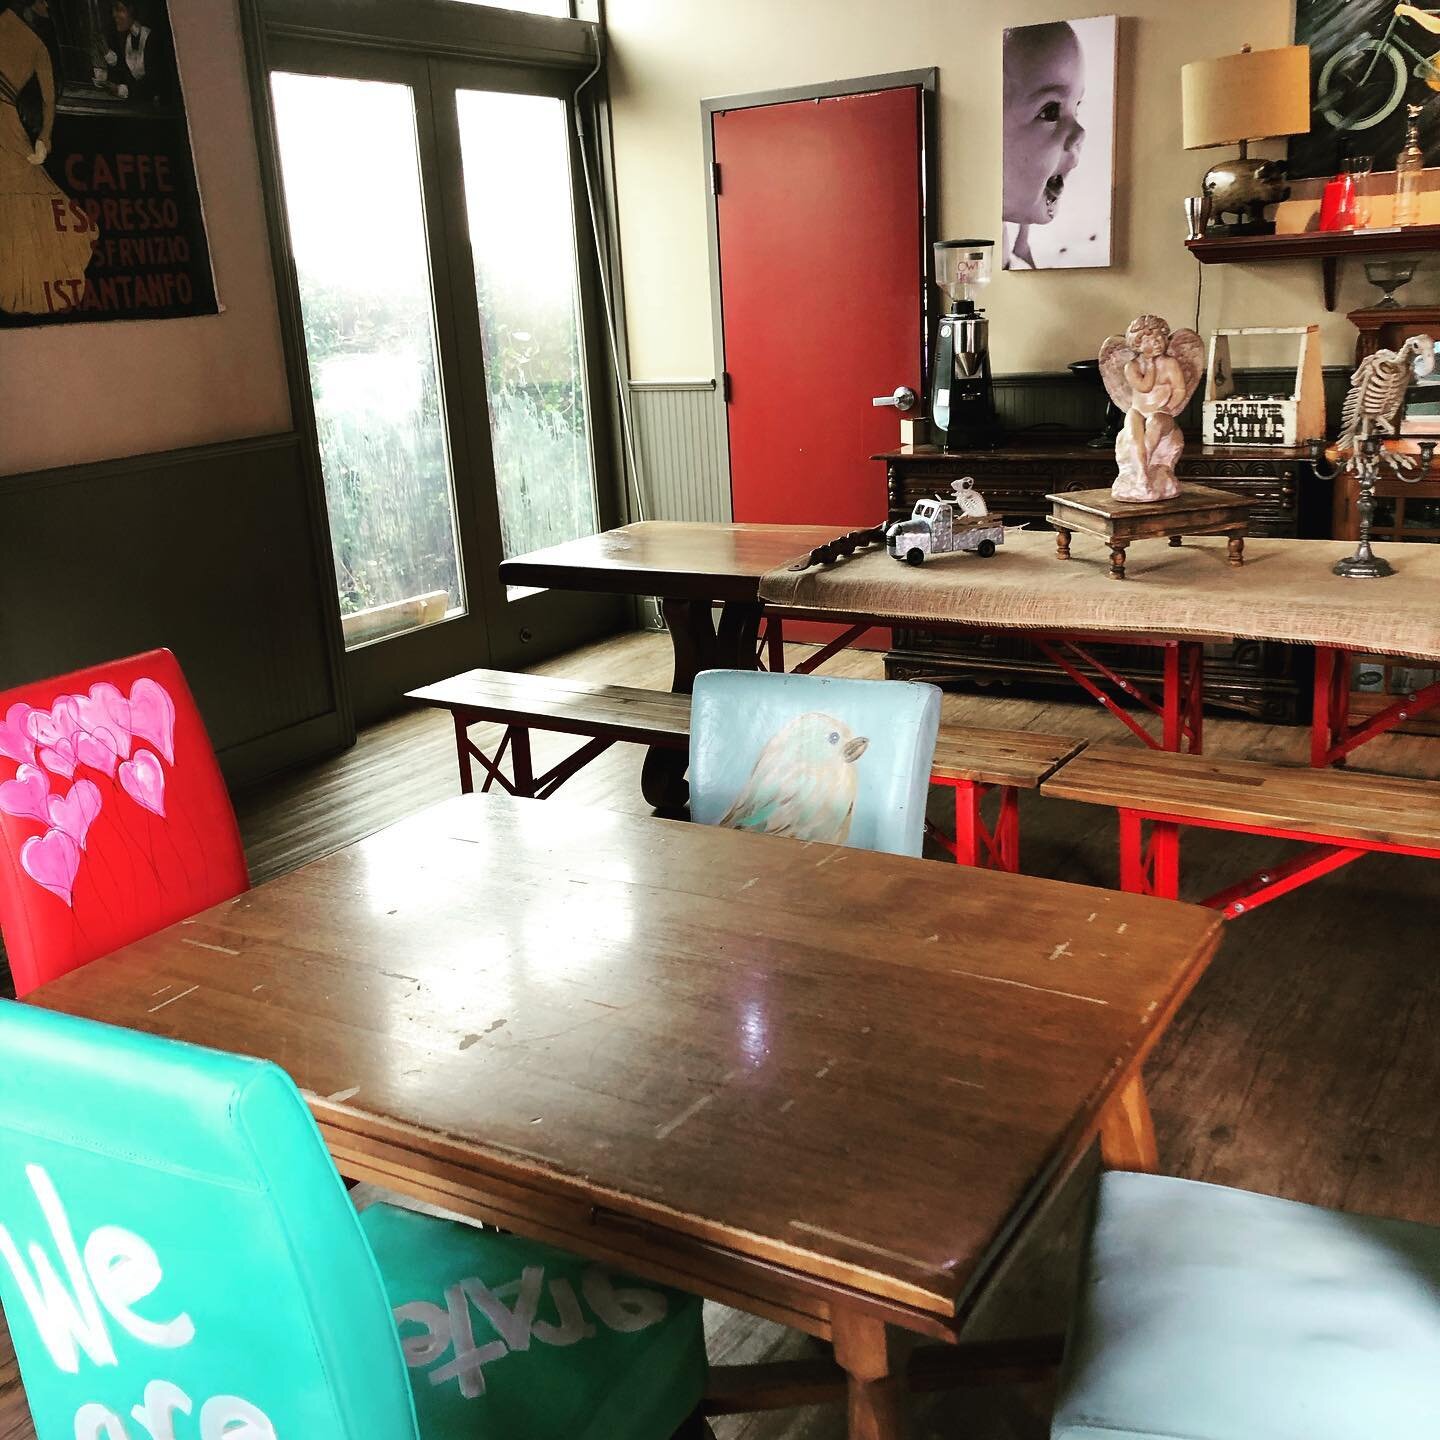 Indoor seating is back!! We are now allowed to offer limited indoor seating. We are on our way back to plant Earth!!! #sideboarddanville #eatlocal #covidsucks